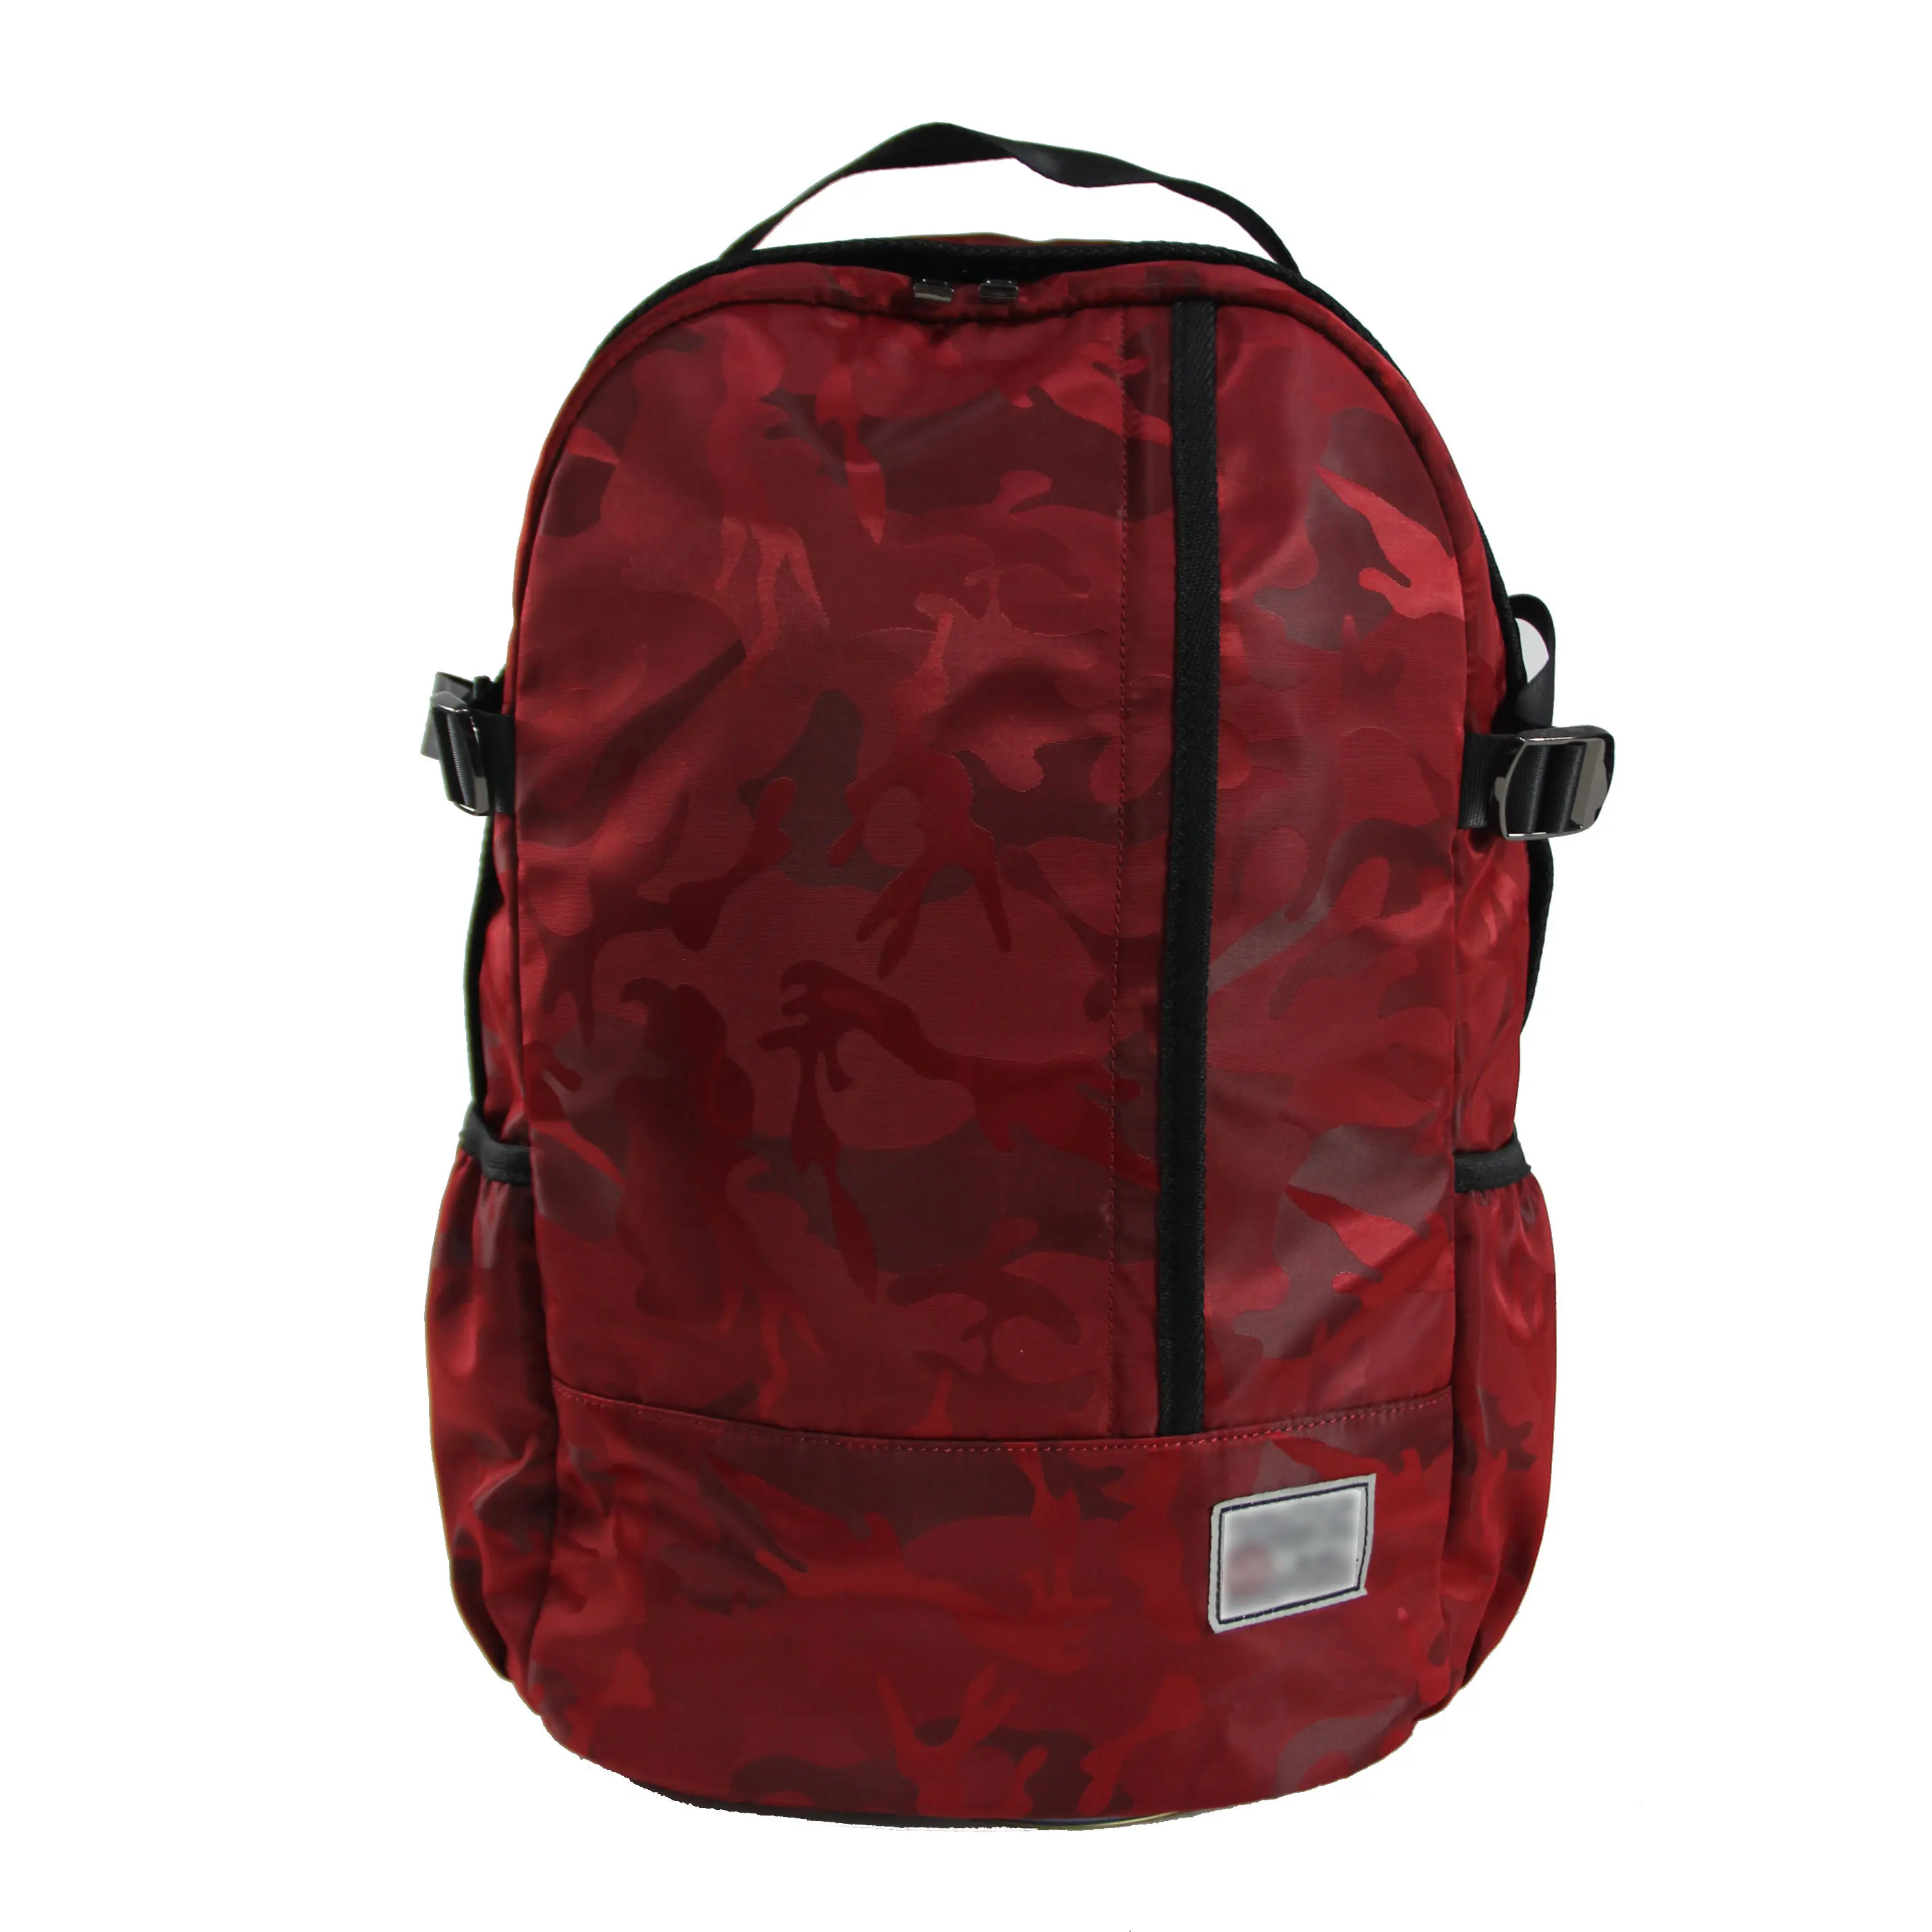 Storage Backpack Business Computer School Bag Fit All Of The Person In Different Age Group